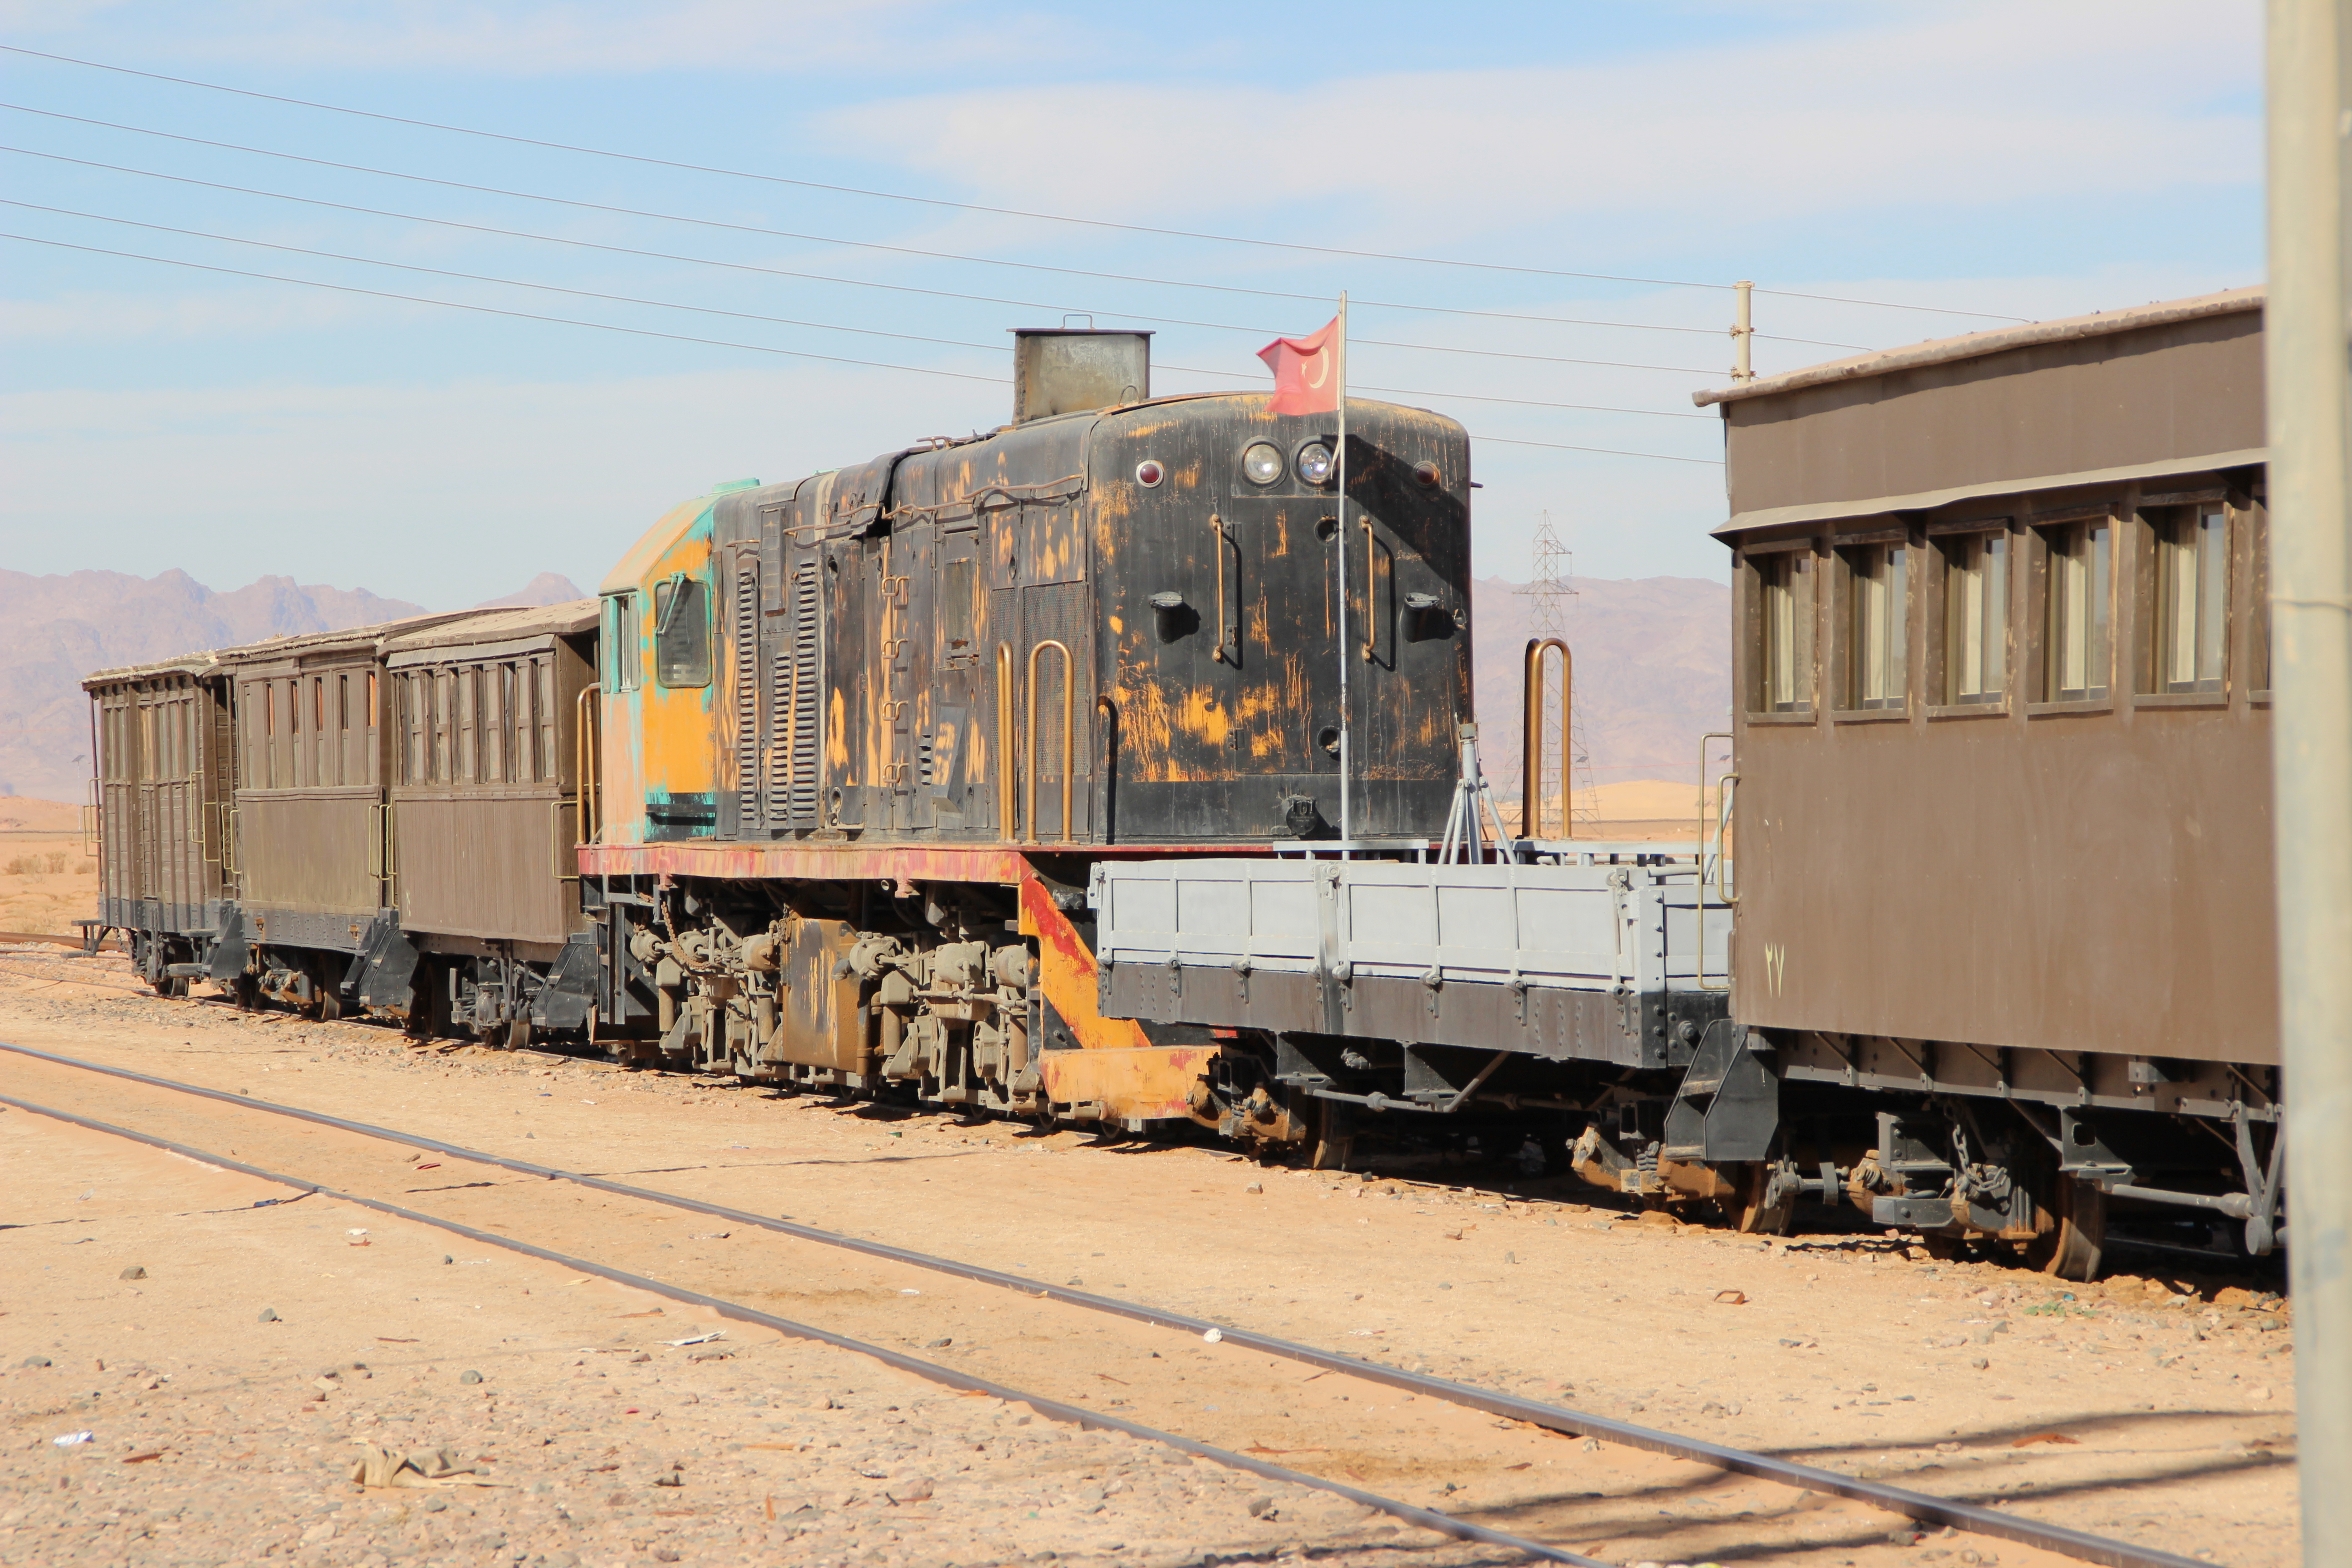 Carriages in the middle of the desert